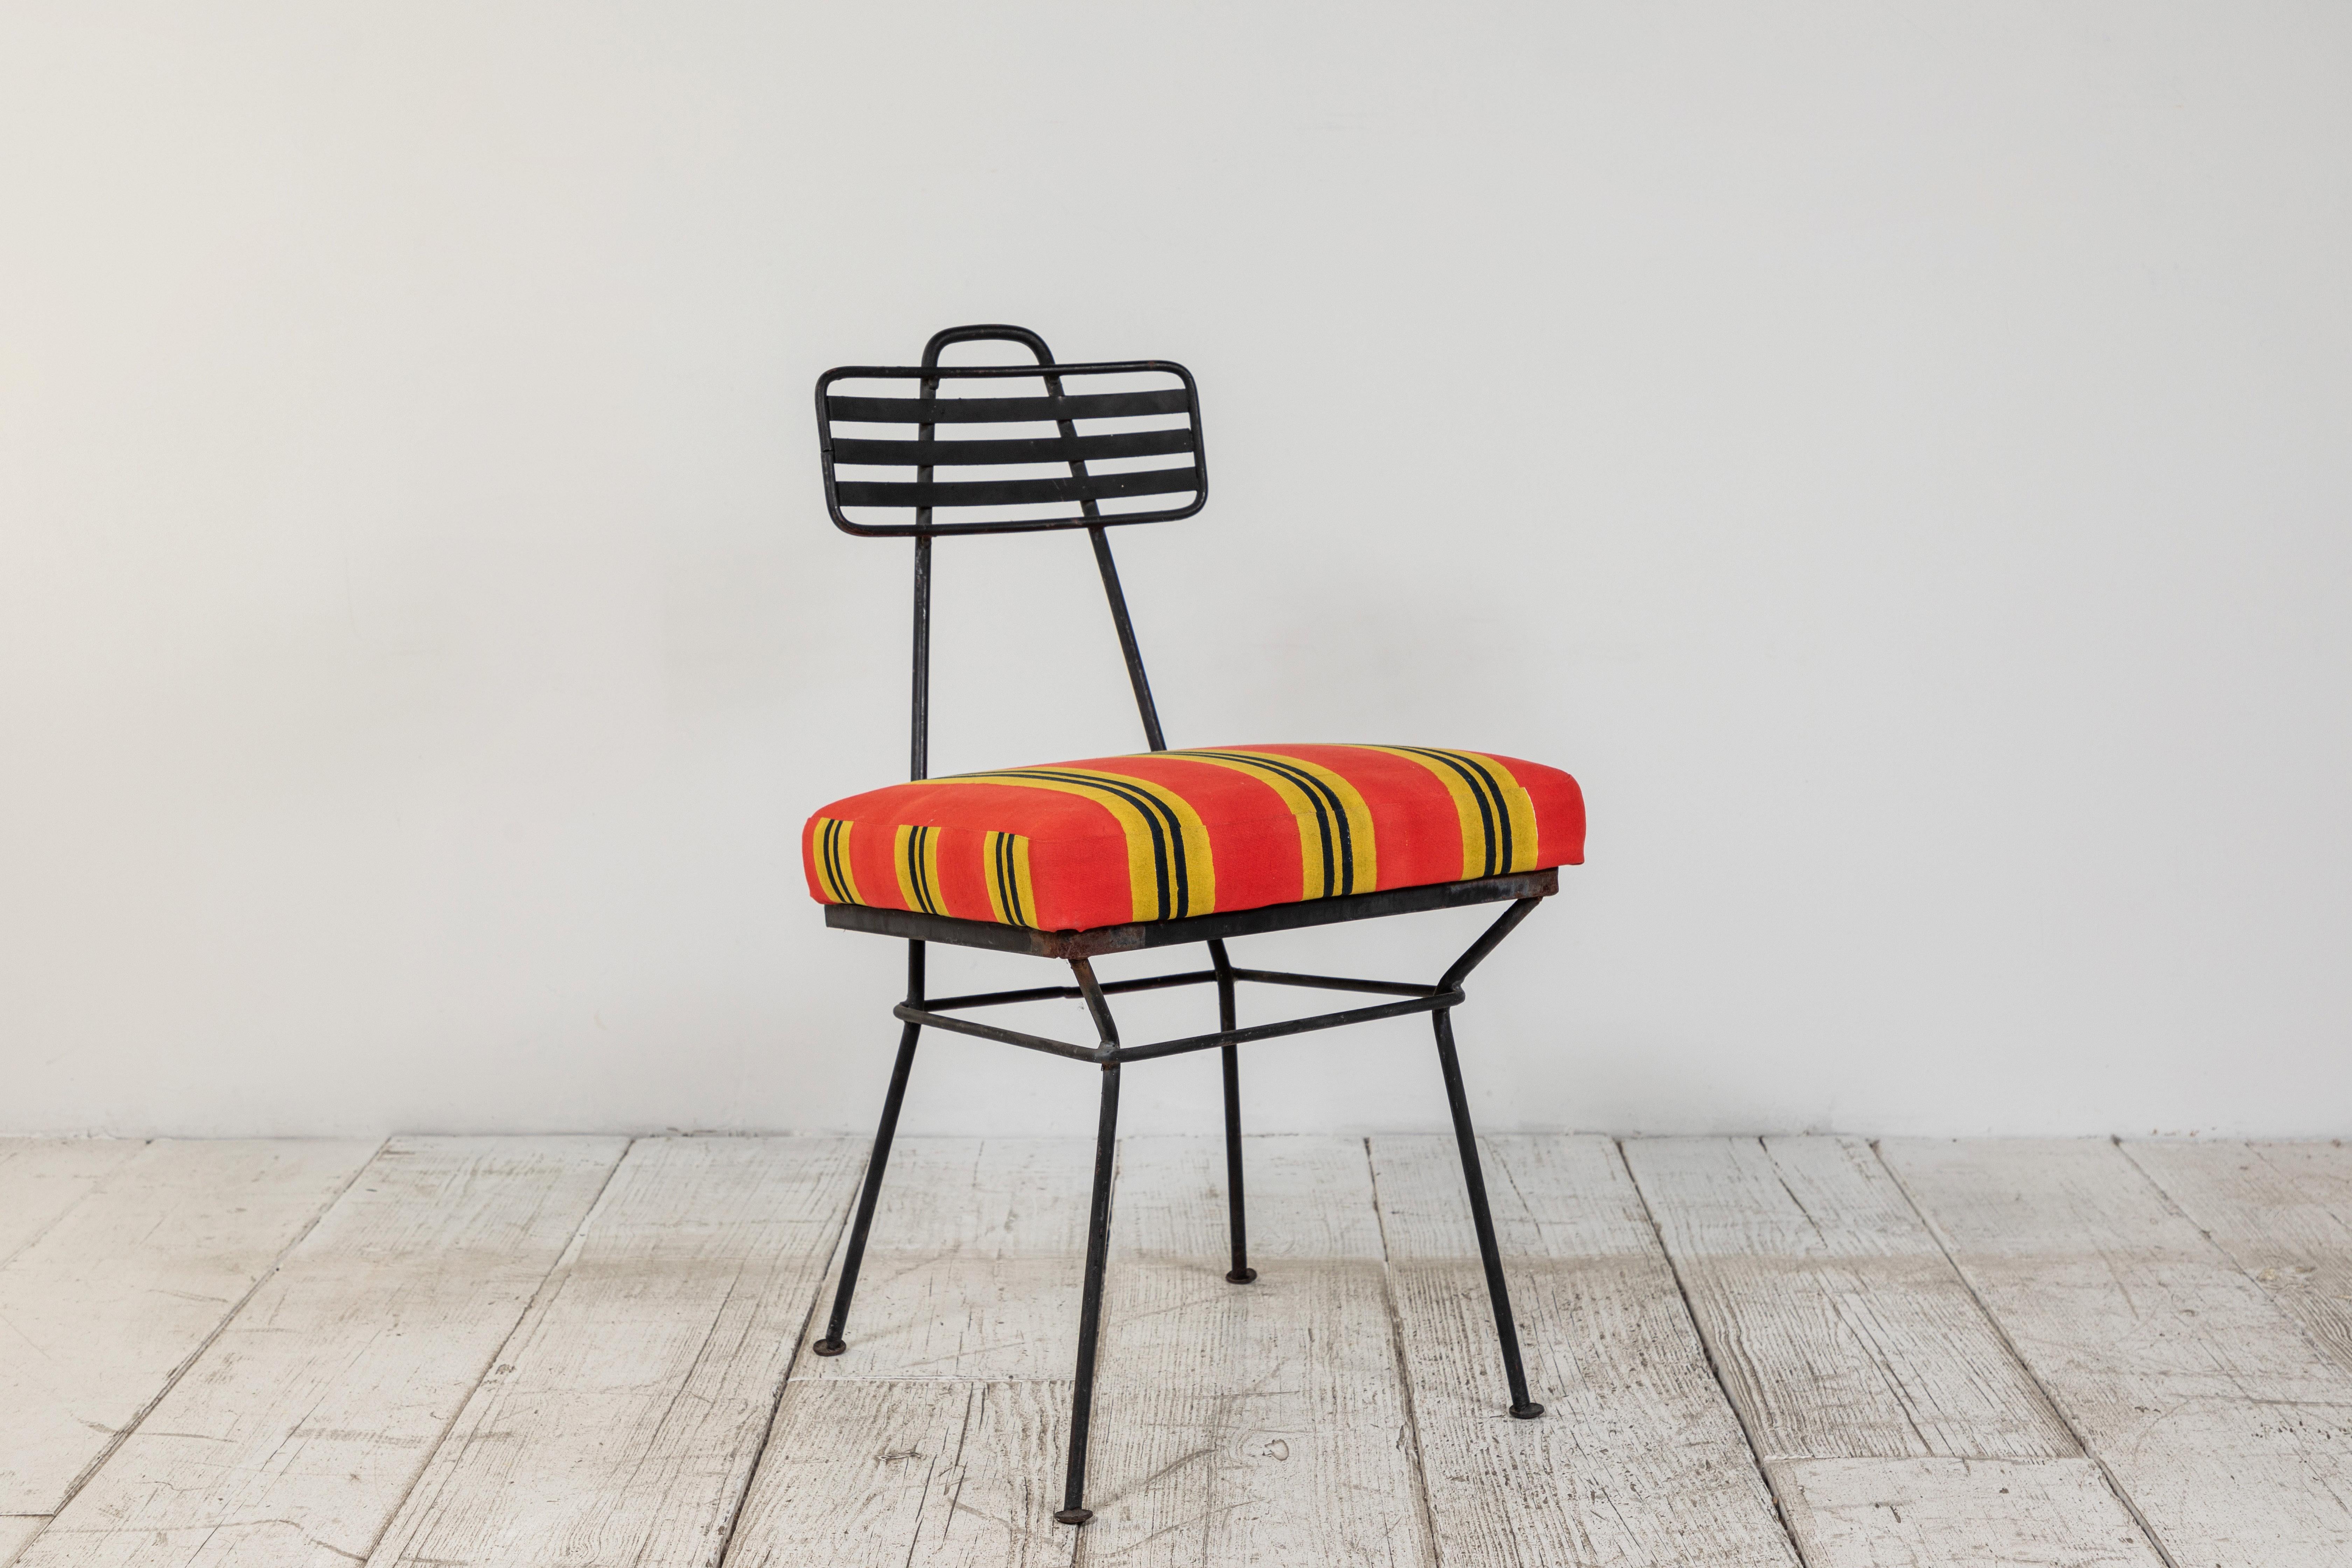 French metal garden chair newly upholstered in a Lisa Corti orange yellow and black canvas.